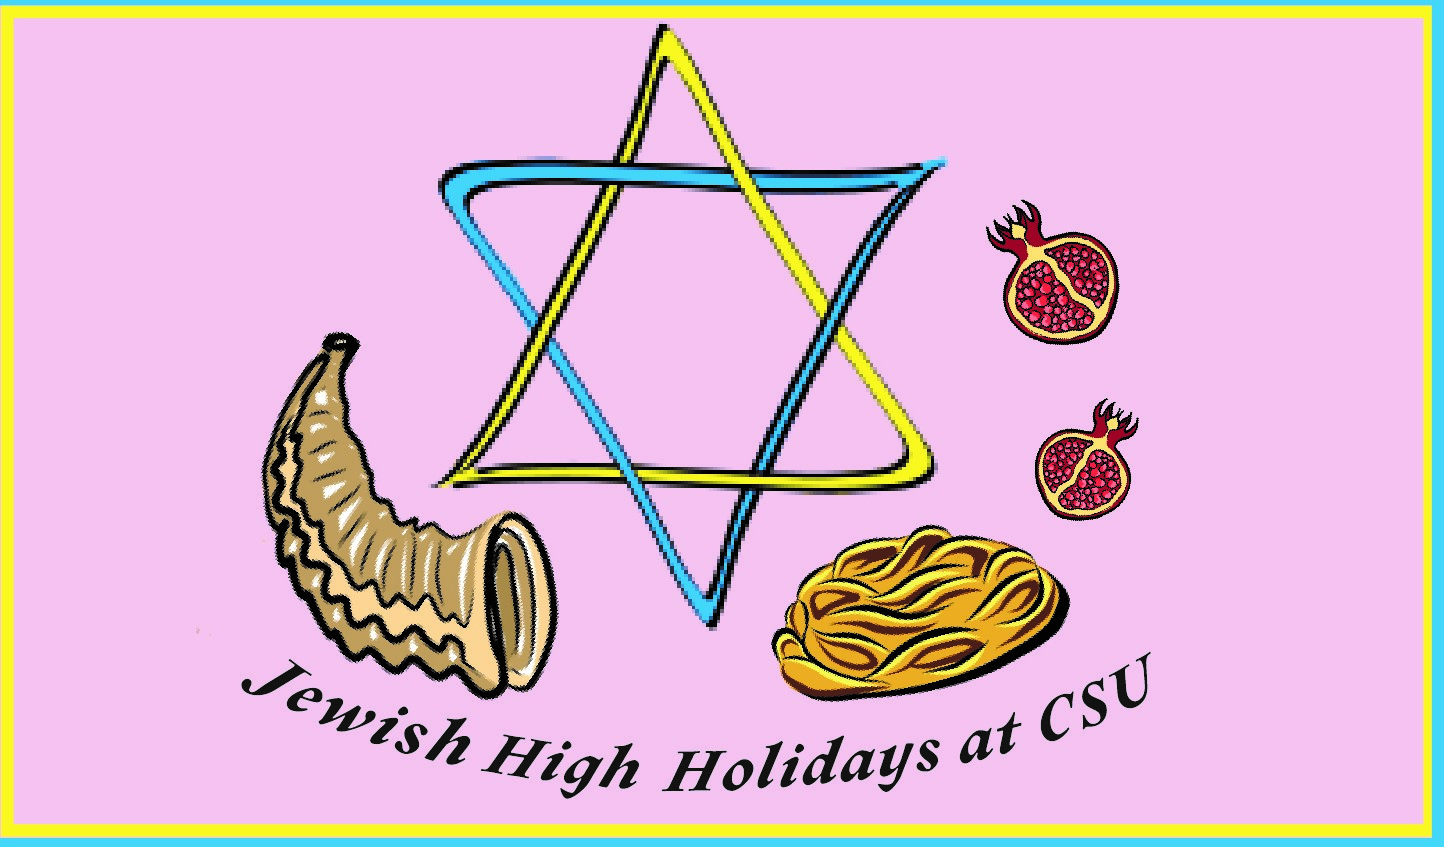 Illustration with the text Jewish High Holidays at CSU. The illustration has a star of david in the center surrounded by a Challah, Shorfor, and pomegranates